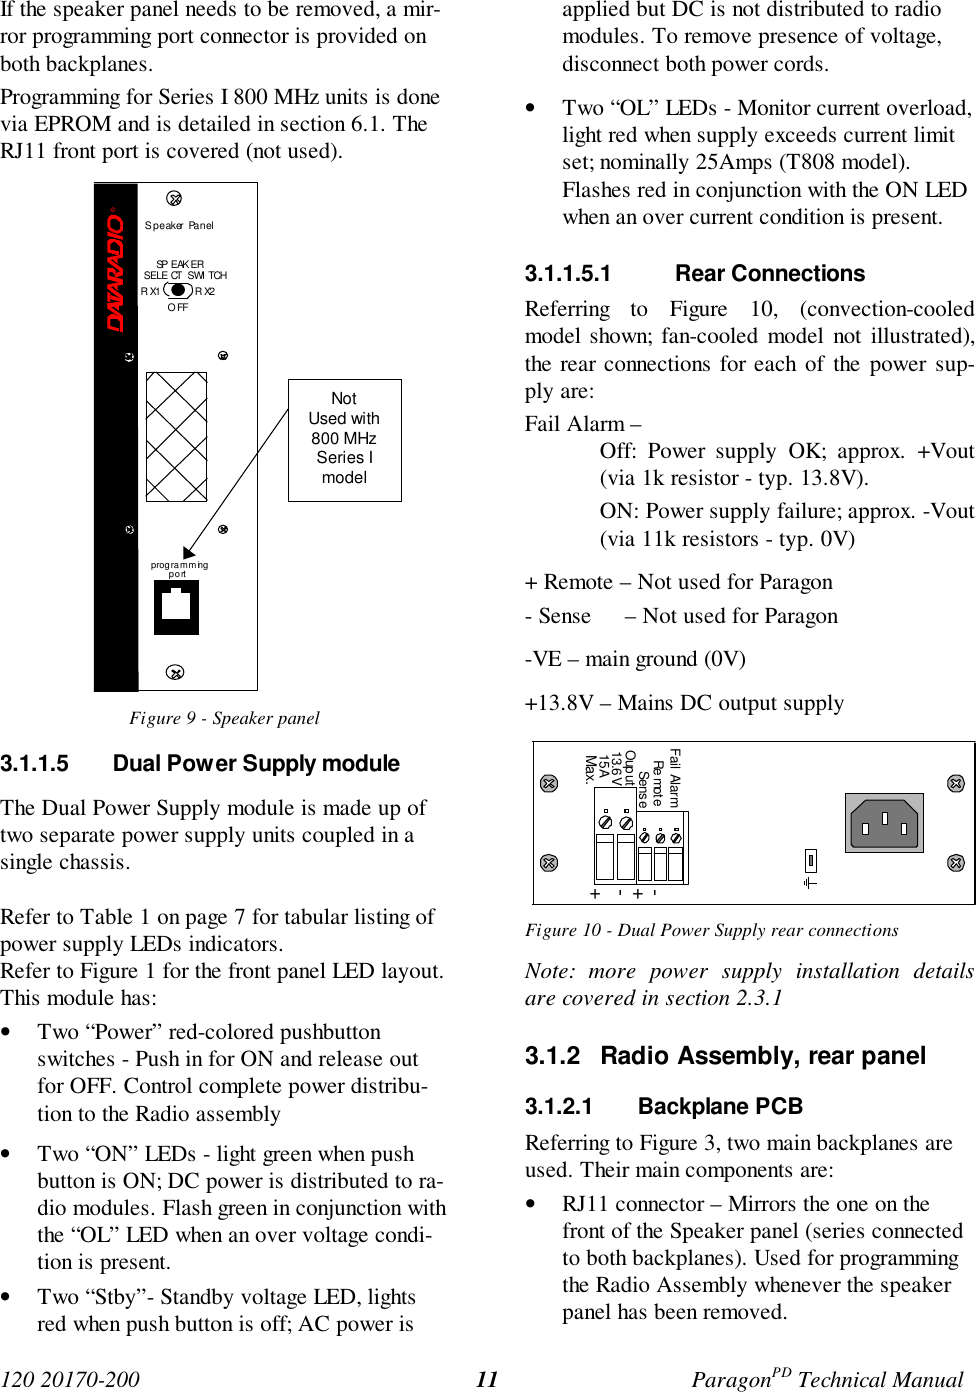 120 20170-200 ParagonPD Technical Manual11If the speaker panel needs to be removed, a mir-ror programming port connector is provided onboth backplanes.Programming for Series I 800 MHz units is donevia EPROM and is detailed in section 6.1. TheRJ11 front port is covered (not used).Figure 9 - Speaker panel3.1.1.5  Dual Power Supply moduleThe Dual Power Supply module is made up oftwo separate power supply units coupled in asingle chassis.Refer to Table 1 on page 7 for tabular listing ofpower supply LEDs indicators.Refer to Figure 1 for the front panel LED layout.This module has:• Two “Power” red-colored pushbuttonswitches - Push in for ON and release outfor OFF. Control complete power distribu-tion to the Radio assembly• Two “ON” LEDs - light green when pushbutton is ON; DC power is distributed to ra-dio modules. Flash green in conjunction withthe “OL” LED when an over voltage condi-tion is present.• Two “Stby”- Standby voltage LED, lightsred when push button is off; AC power isapplied but DC is not distributed to radiomodules. To remove presence of voltage,disconnect both power cords.• Two “OL” LEDs - Monitor current overload,light red when supply exceeds current limitset; nominally 25Amps (T808 model).Flashes red in conjunction with the ON LEDwhen an over current condition is present.3.1.1.5.1 Rear ConnectionsReferring to Figure 10, (convection-cooledmodel shown; fan-cooled model not illustrated),the rear connections for each of the power sup-ply are:Fail Alarm –Off: Power supply OK; approx. +Vout(via 1k resistor - typ. 13.8V).ON: Power supply failure; approx. -Vout(via 11k resistors - typ. 0V)+ Remote – Not used for Paragon- Sense     – Not used for Paragon-VE – main ground (0V)+13.8V – Mains DC output supplyFigure 10 - Dual Power Supply rear connectionsNote: more power supply installation detailsare covered in section 2.3.13.1.2  Radio Assembly, rear panel3.1.2.1 Backplane PCBReferring to Figure 3, two main backplanes areused. Their main components are:• RJ11 connector – Mirrors the one on thefront of the Speaker panel (series connectedto both backplanes). Used for programmingthe Radio Assembly whenever the speakerpanel has been removed.15A +-OuputSense +-Re moteFail Alarm13.6VMax.®Speaker Panelprogra mm ingportRX2RX1OFFSP EAK ERSELE CT  SWI TCHNotUsed with800 MHzSeries Imodel